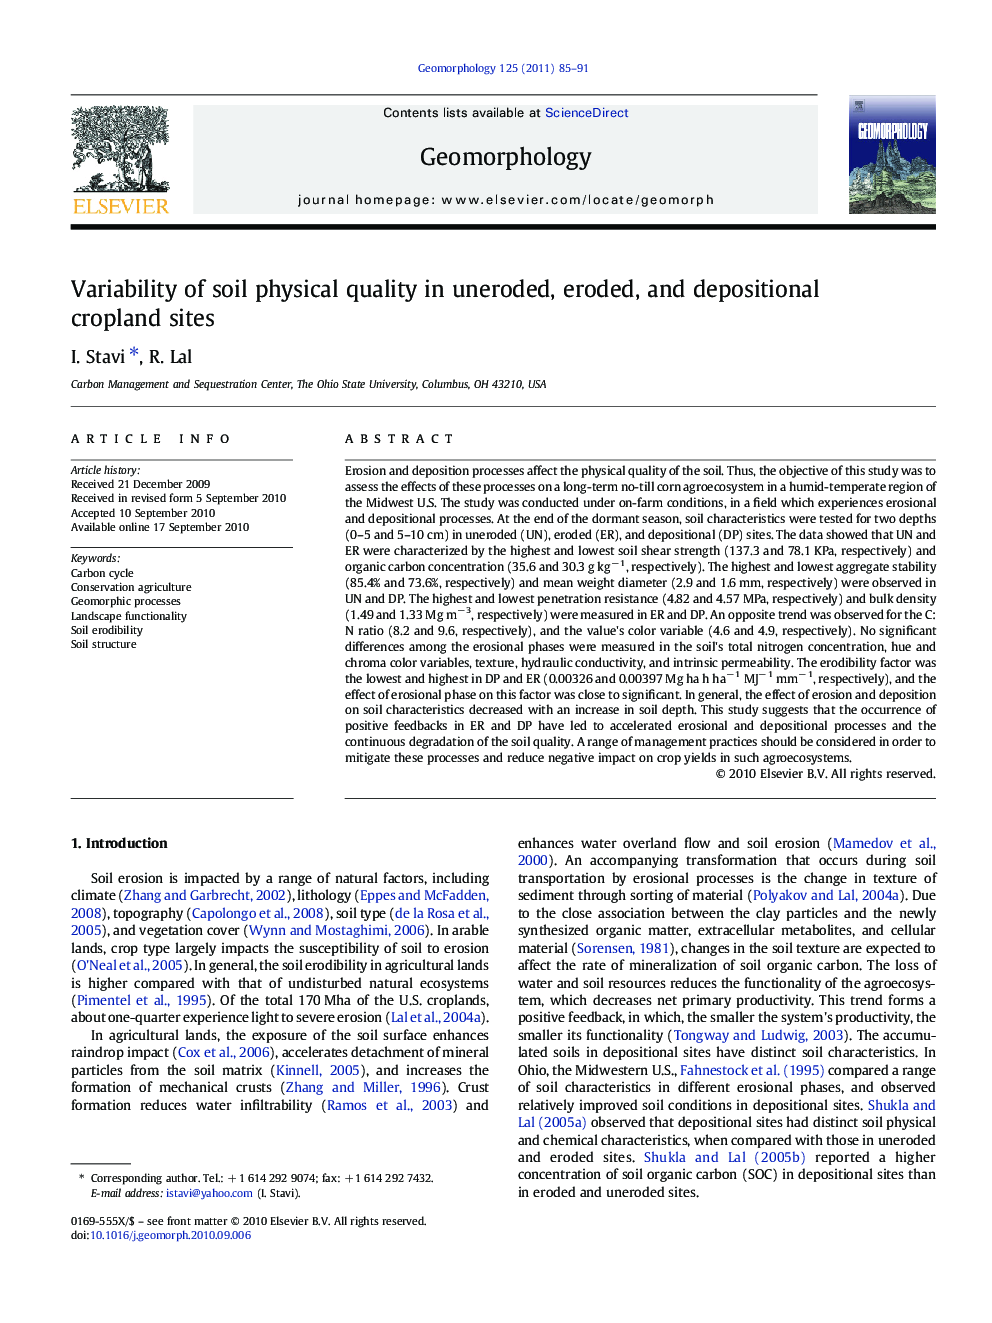 Variability of soil physical quality in uneroded, eroded, and depositional cropland sites